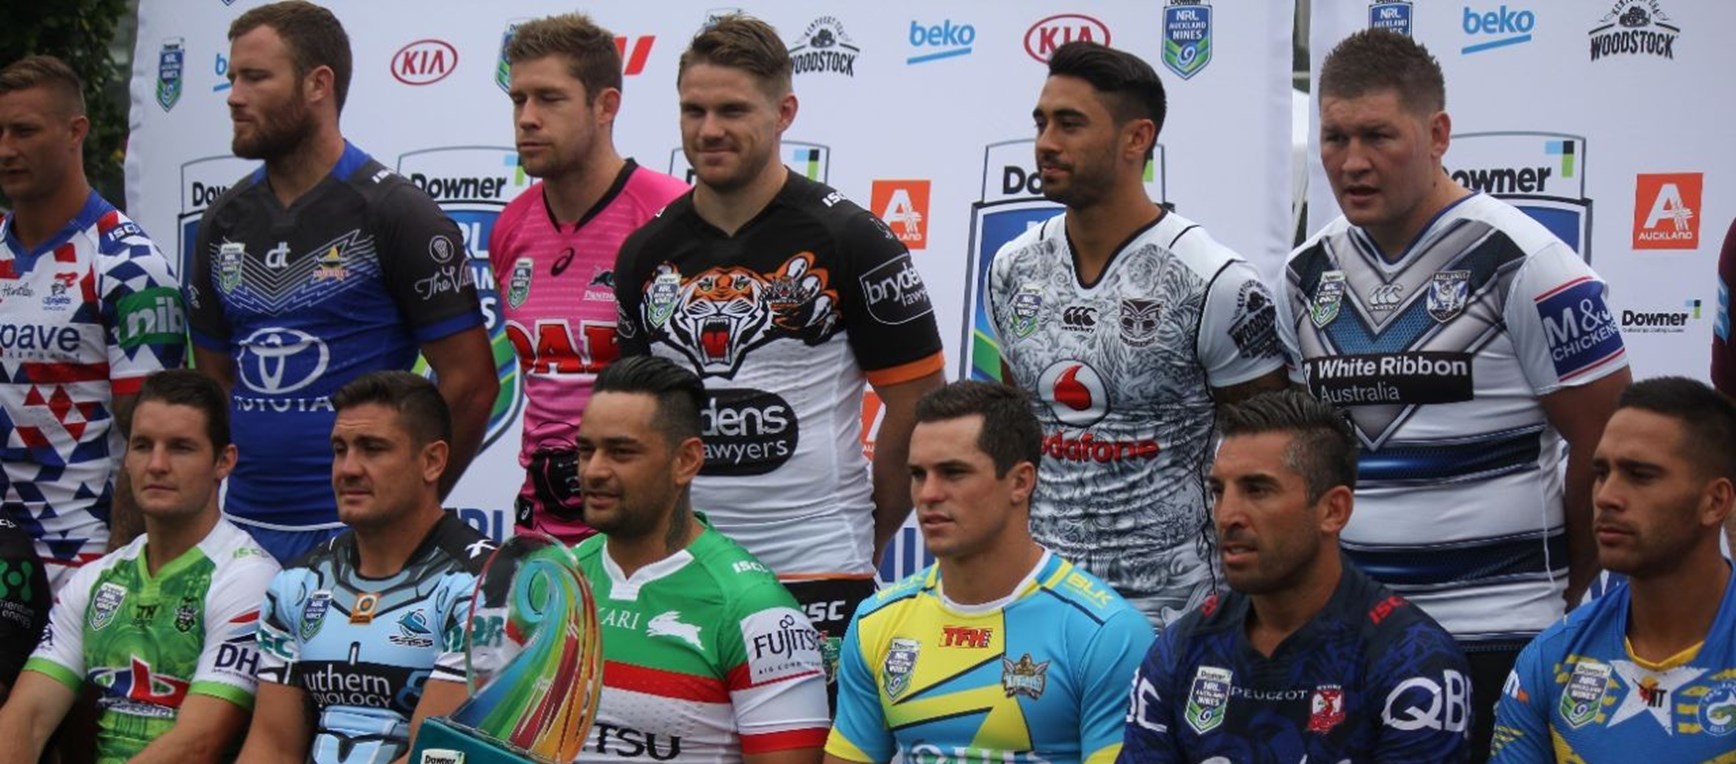 Gallery | NRL Auckland Nines Fan Day